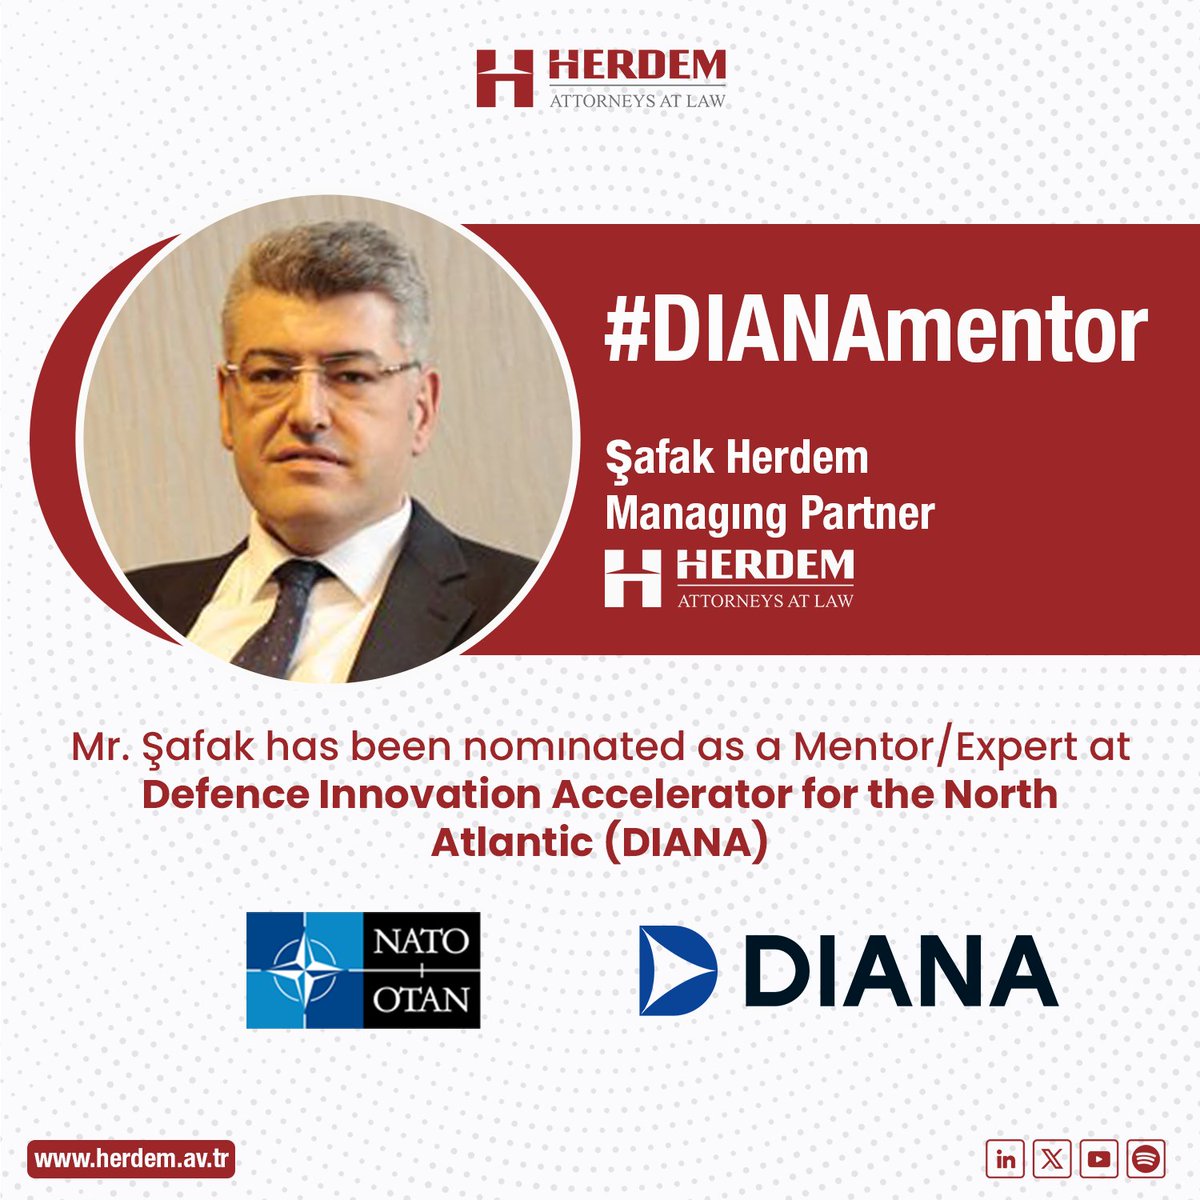 🌟 Exciting Announcement! 🌟

Proud to announce that Mr. Safak Herdem has been nominated as a Mentor/Expert for the NATO DIANA - Defense Innovation Accelerator for the North Atlantic (DIANA) program! by NATO🚀

#DefenseInnovation #DIANA #Mentorship #herdem #NATO #attorneysatlaw